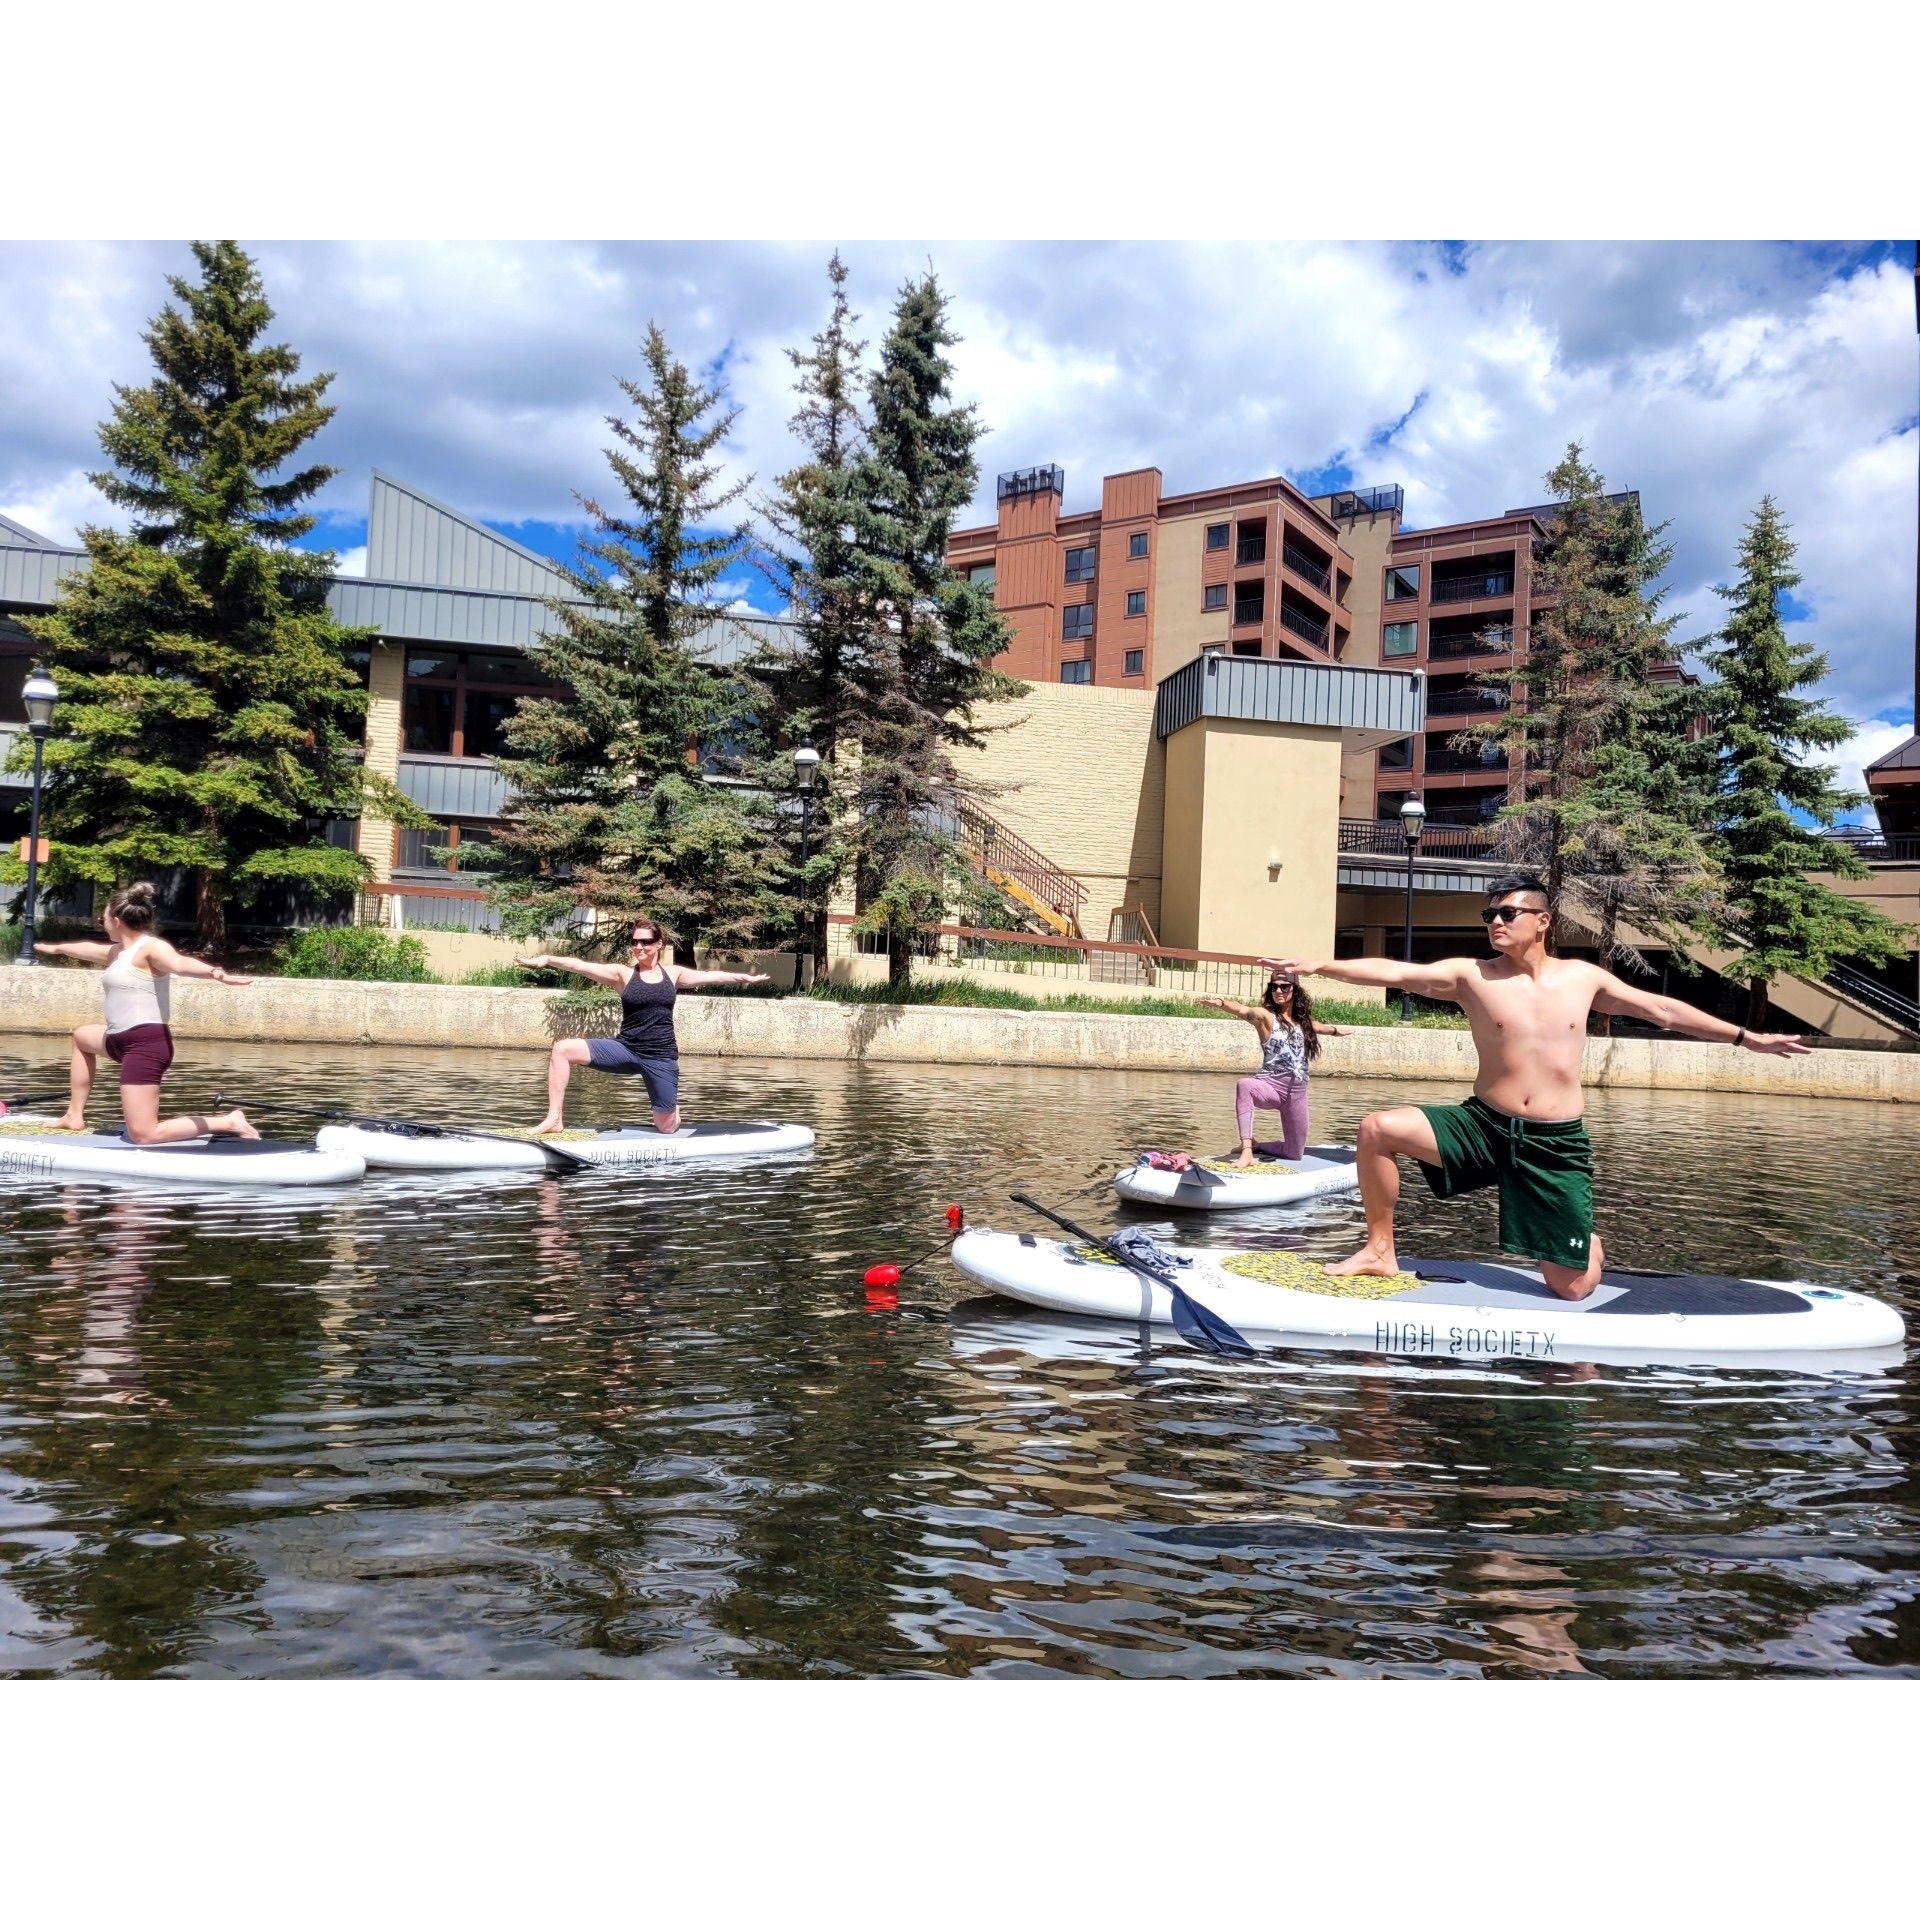 Paddleboard Yoga in Breckenridge! One of us fell.... you will never guess who! 👀